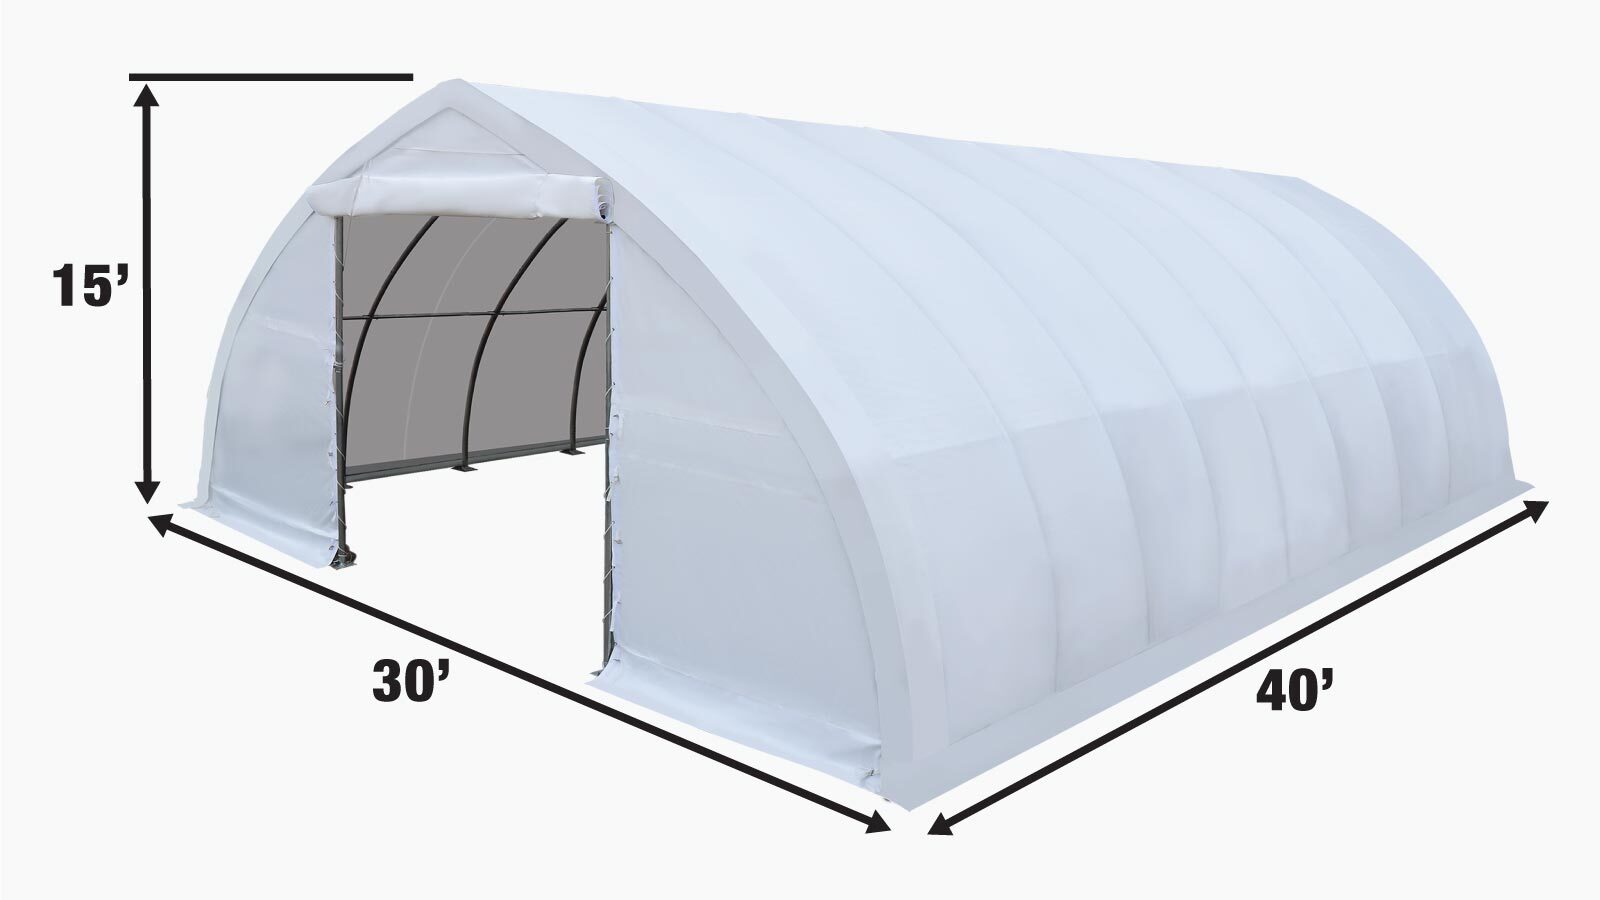 TMG Industrial 30' x 40' Peak Ceiling Storage Shelter with Heavy Duty 17 oz PVC Cover & Drive Through Doors, TMG-ST3040V-specifications-image